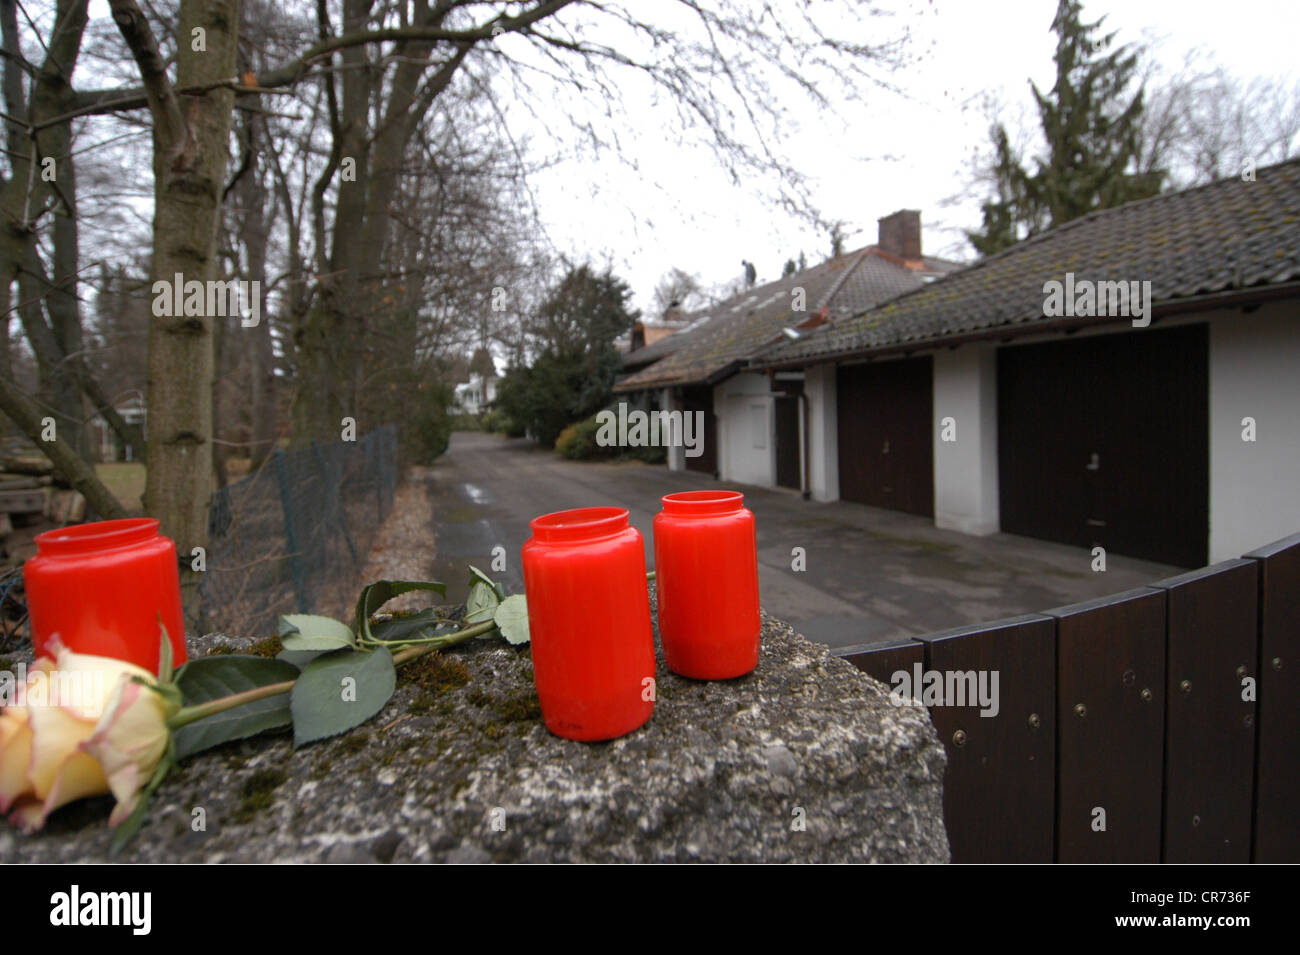 Moshammer, Rudolph, 27.9.1940 - 14.01.2005, German fashion designer, his death, candles in front of his house, Robert Koch Strasse 11 in Gruenwald near Munich, Germany, 20.1.2005, Stock Photo